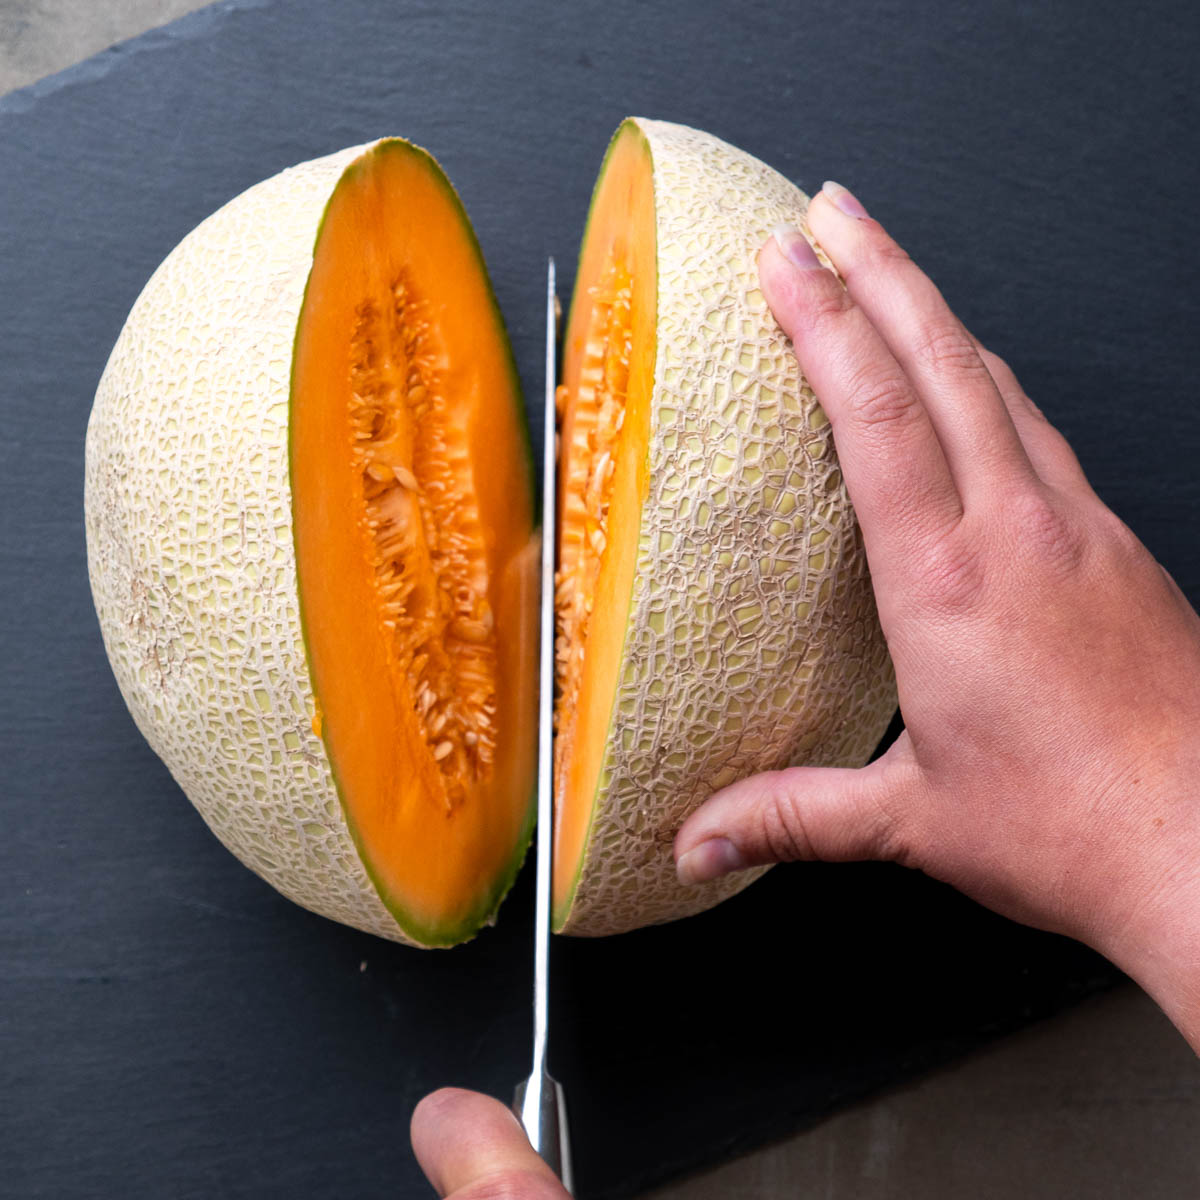 how to cut a cantaloupe steps: cut it in half long ways